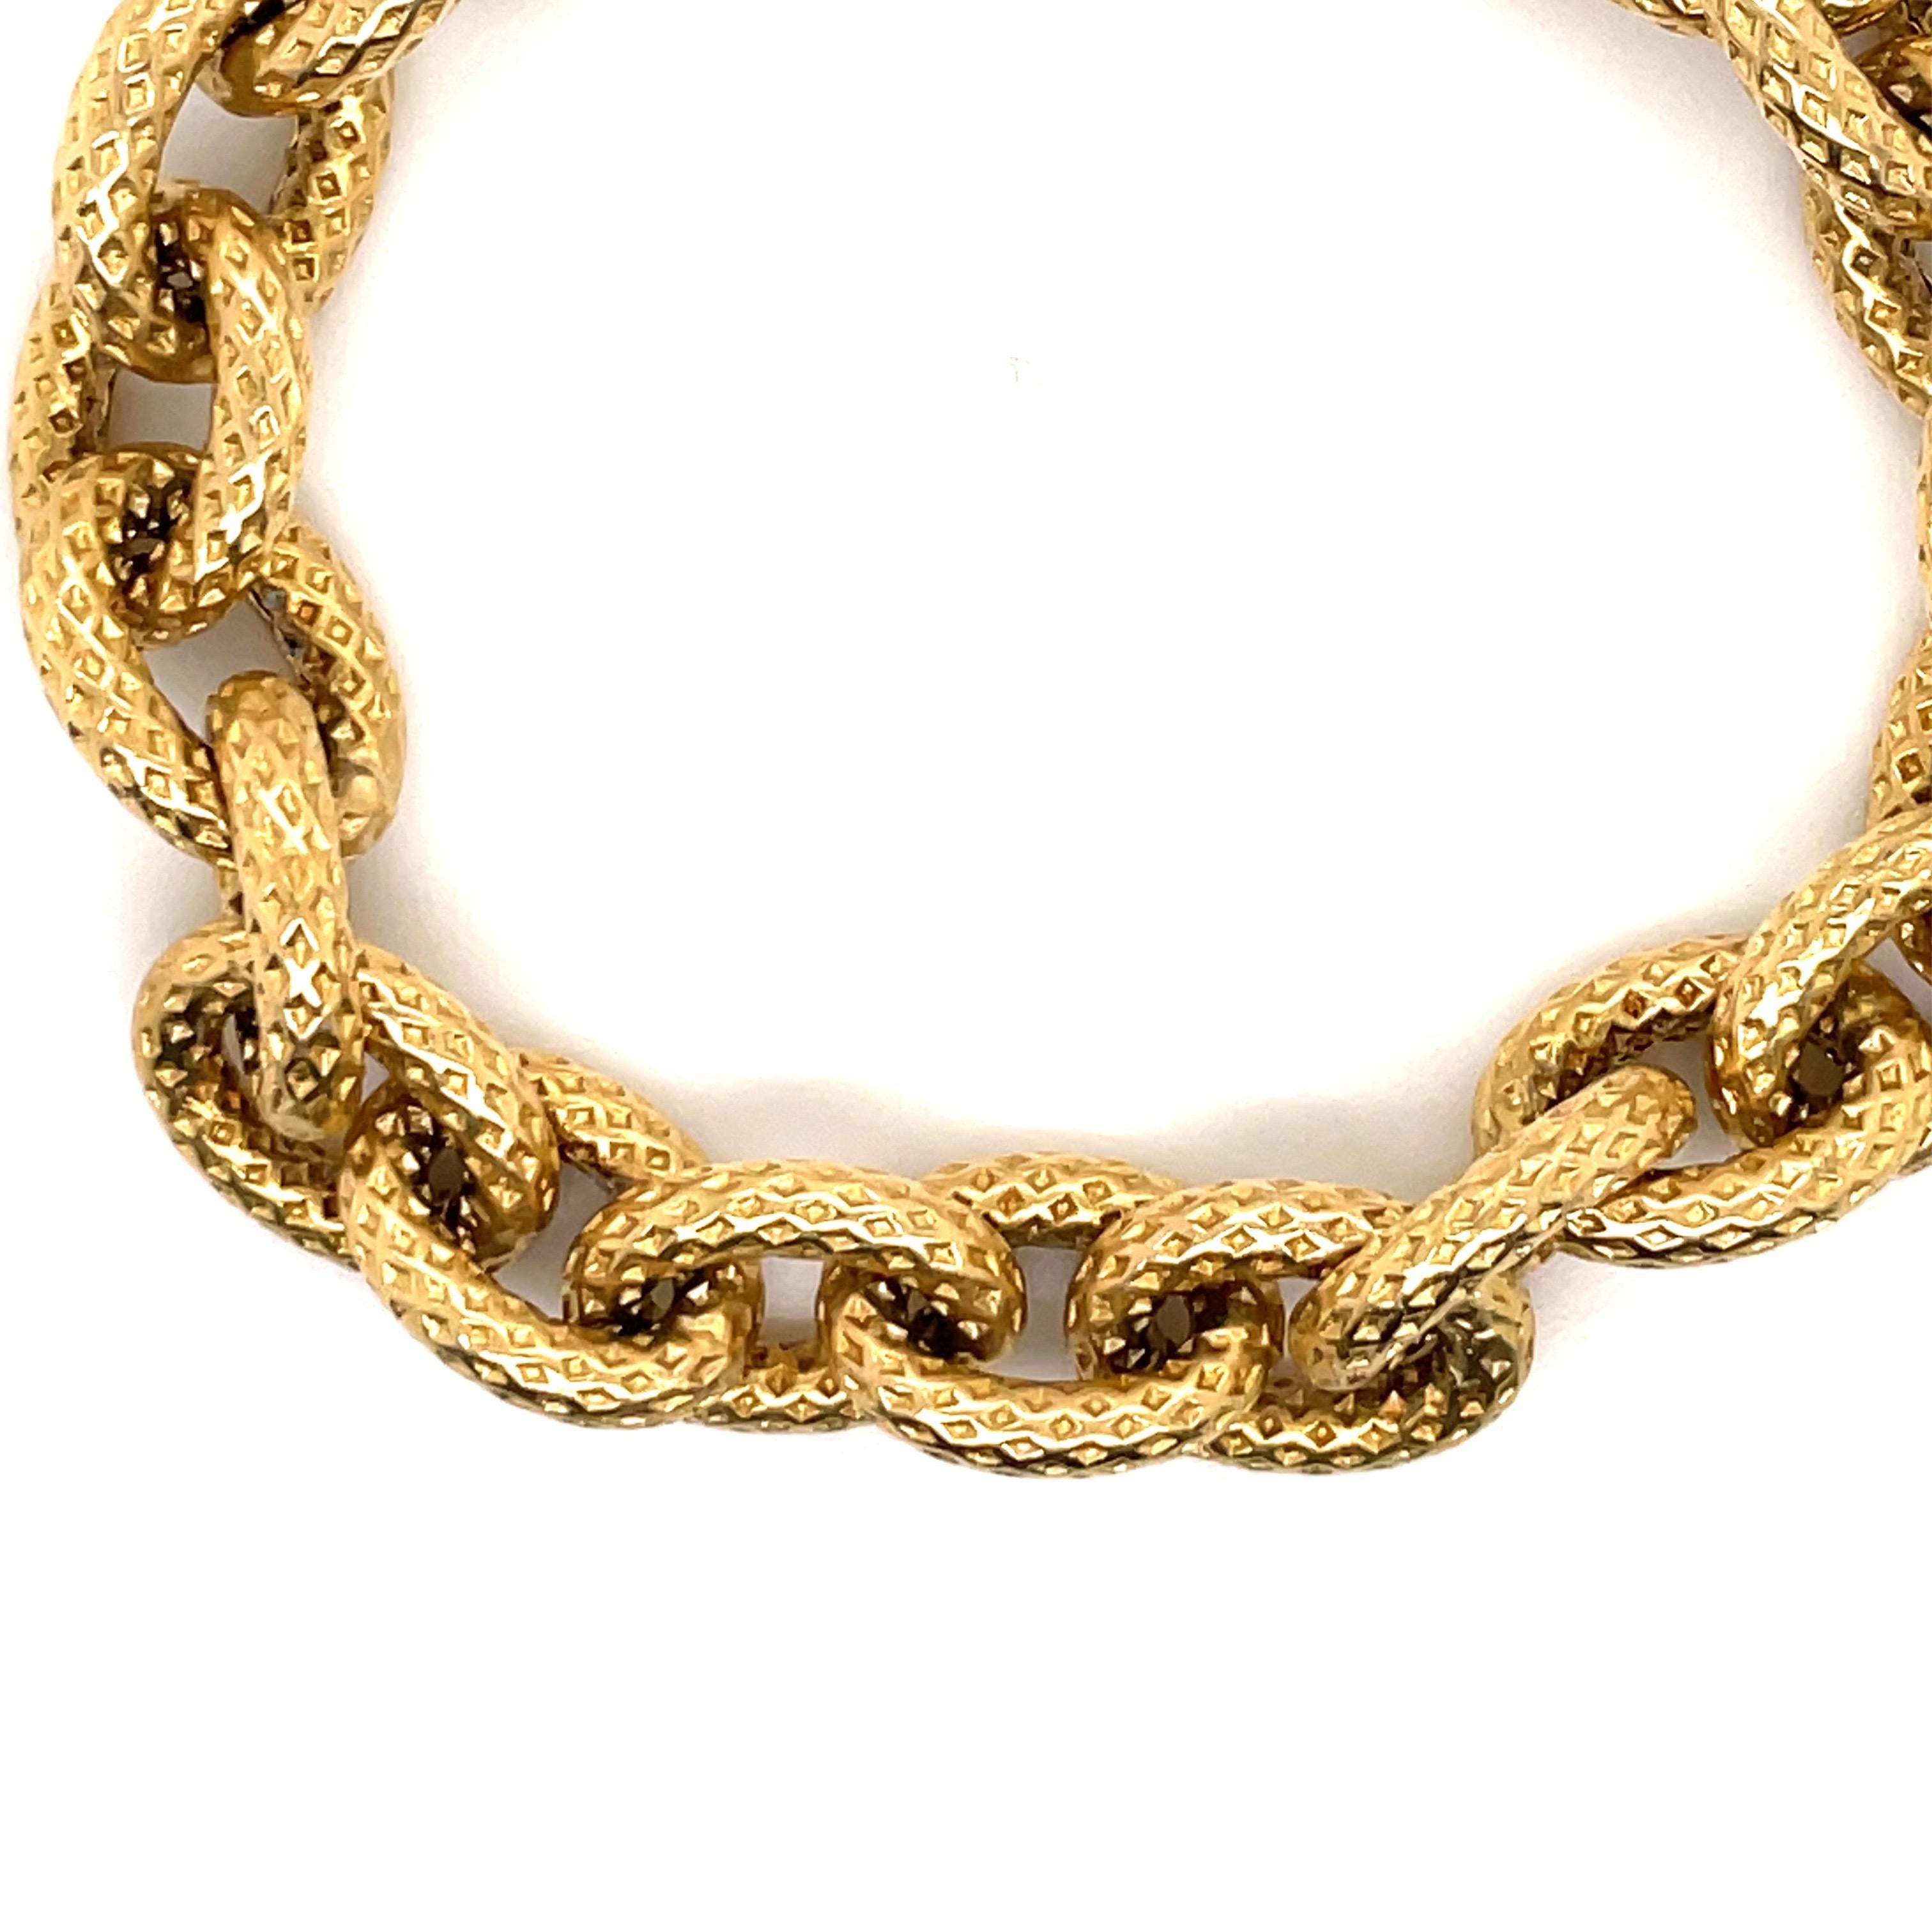 14 Karat Yellow Gold Hammered Link Bracelet 17.3 Grams Made in Italy 1